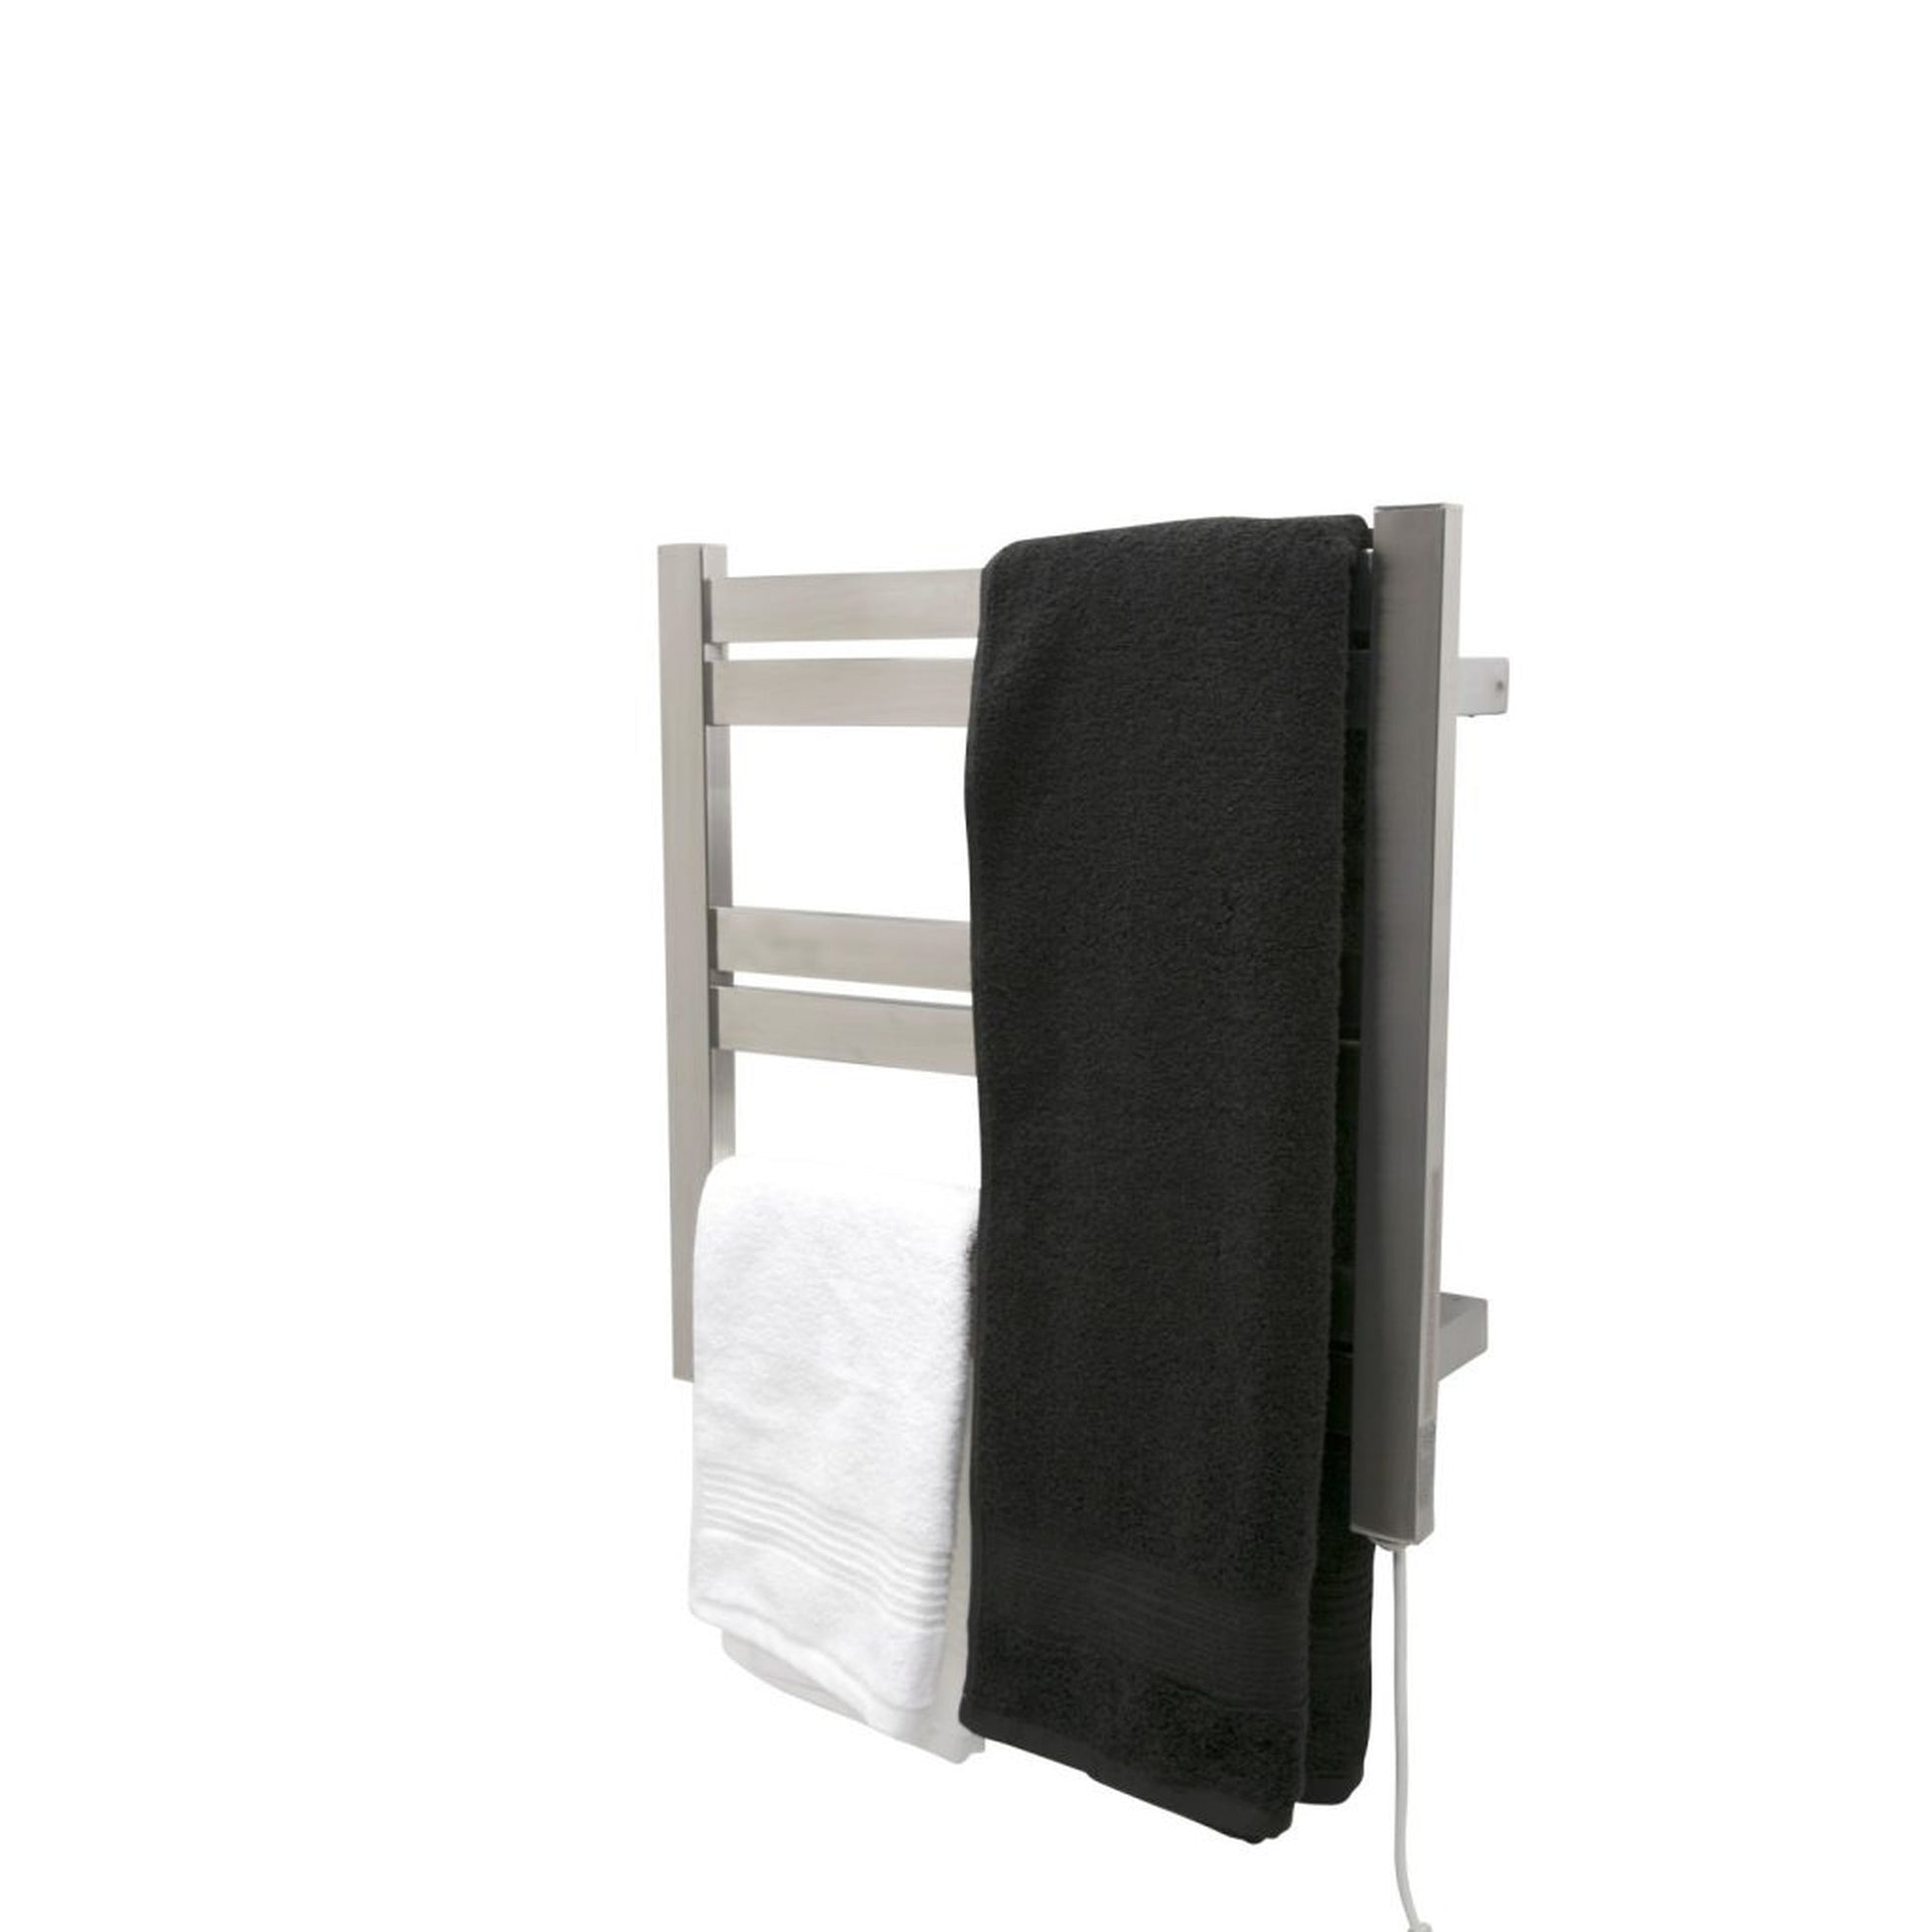 ANZZI Starling Series Brushed Nickel 6-Bar Stainless Steel Wall-Mounted Electric Towel Warmer Rack